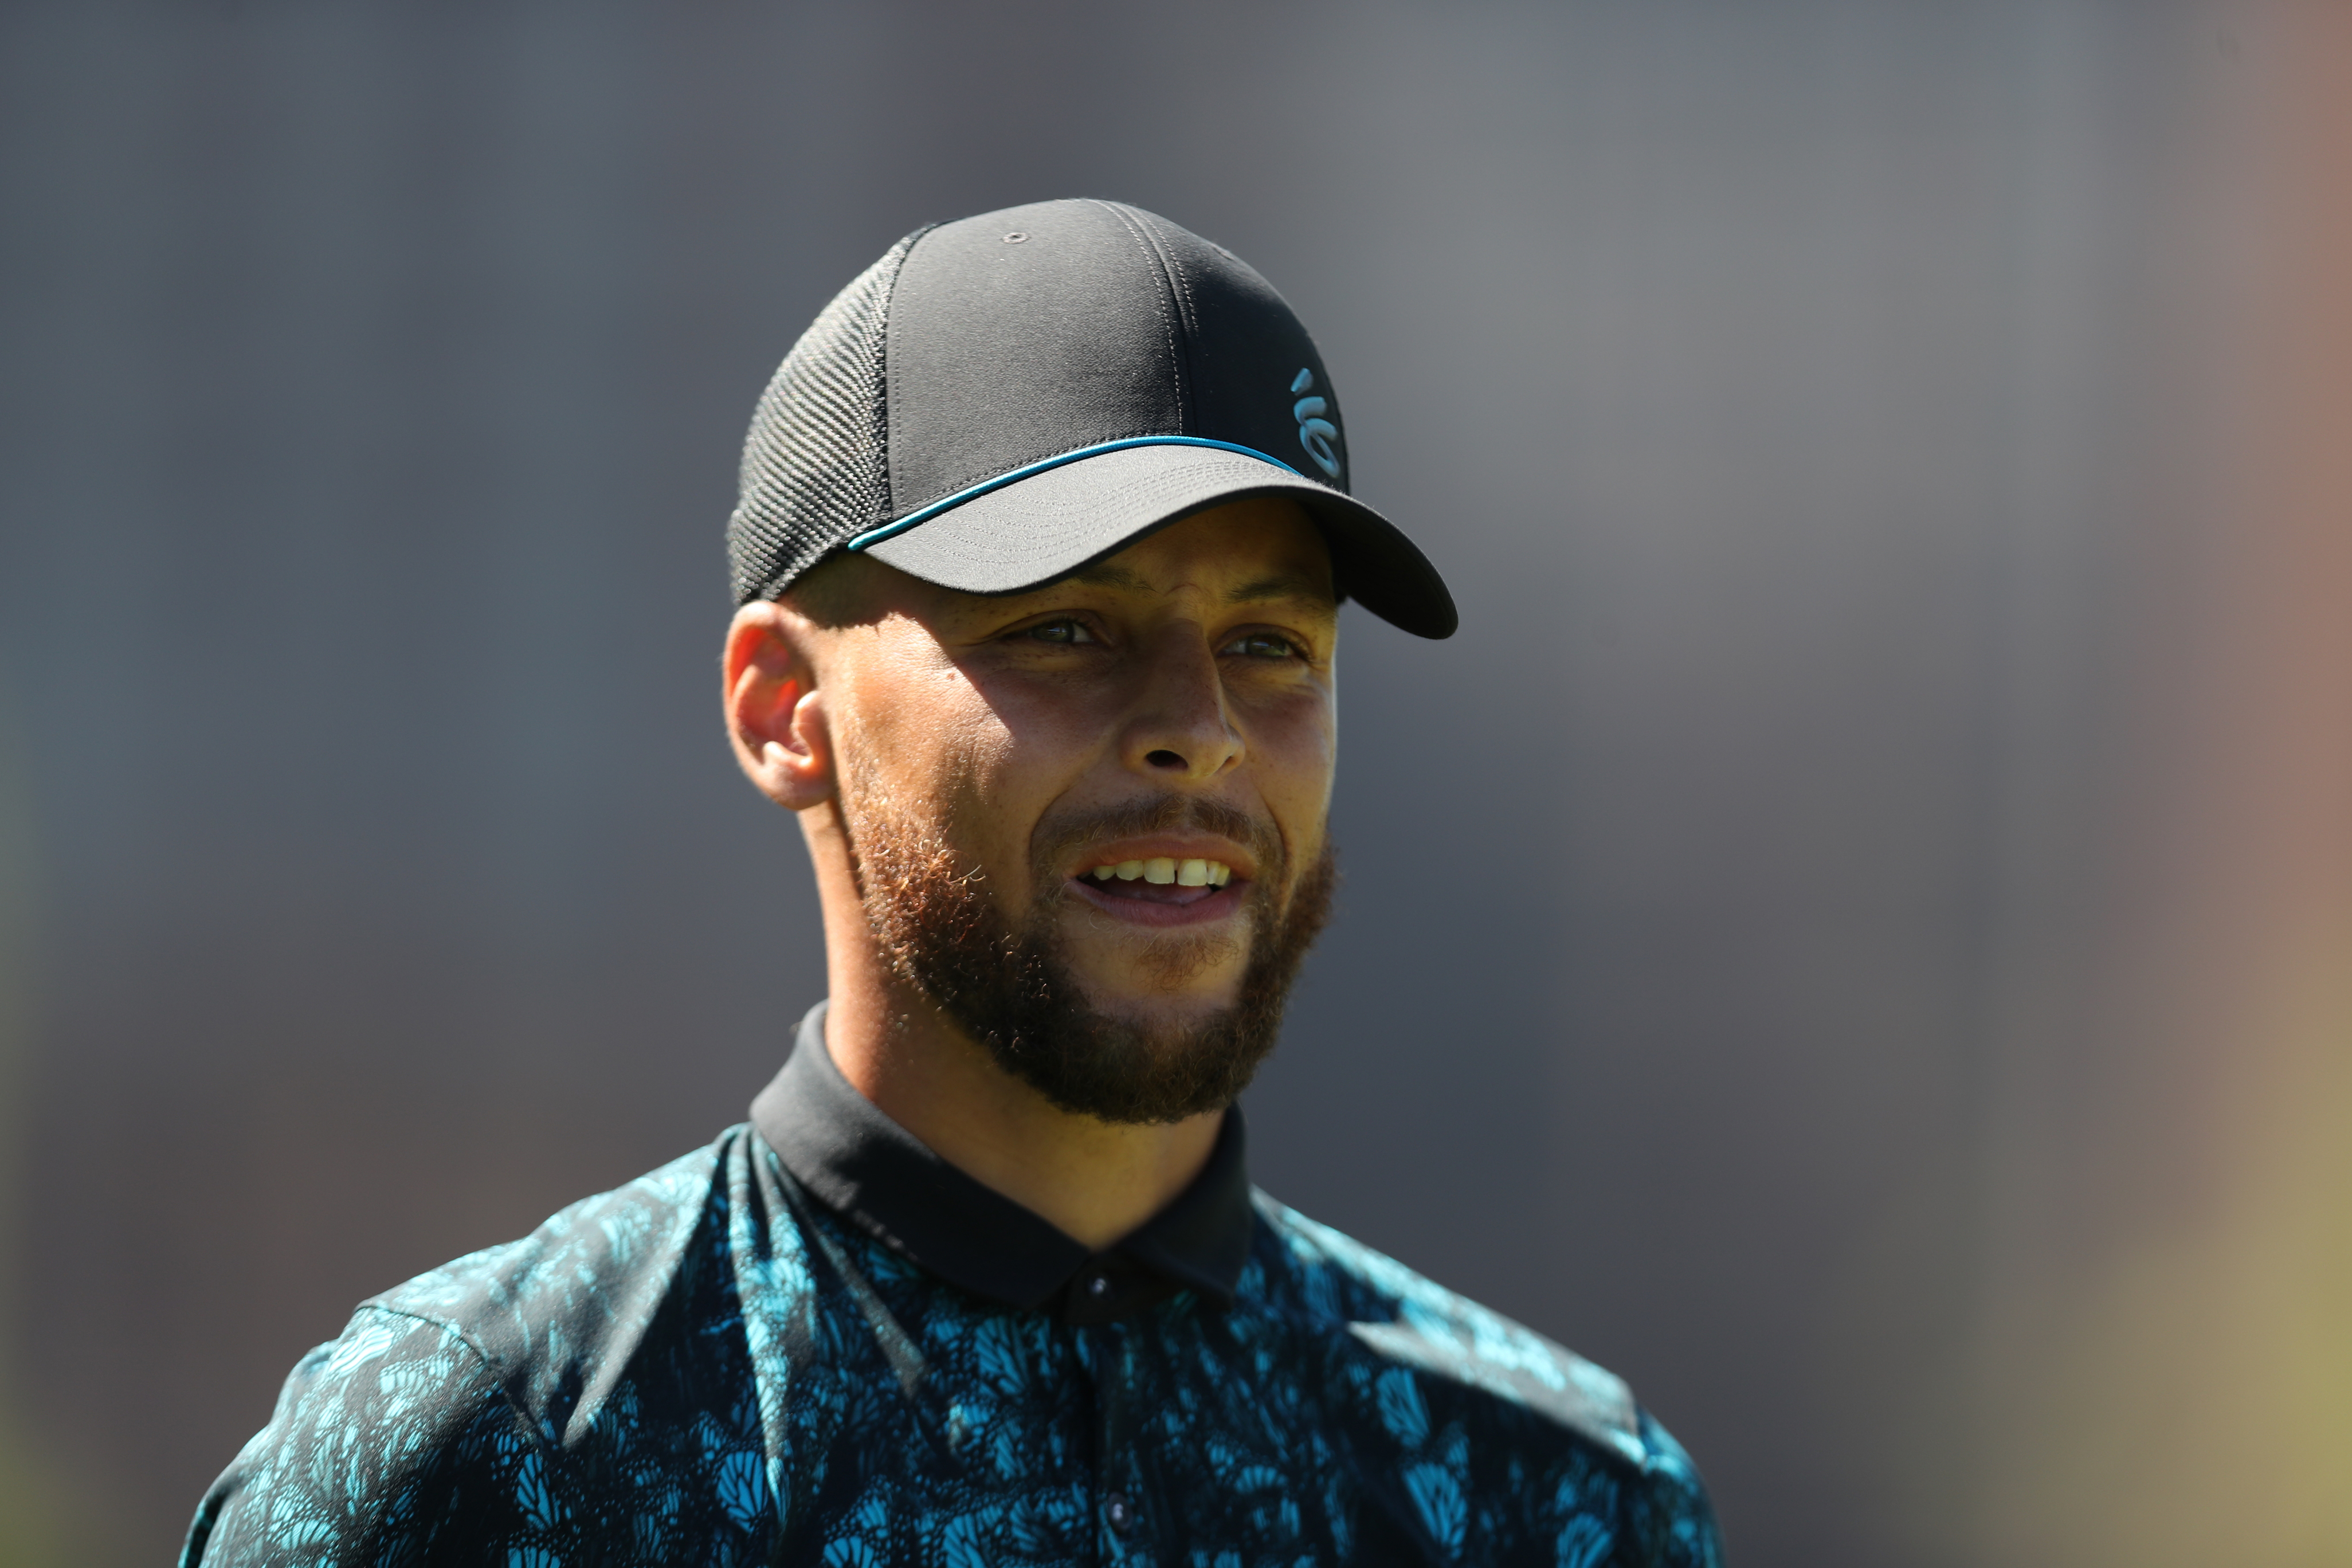 Warriors star Stephen Curry looks on during the American Century Championship